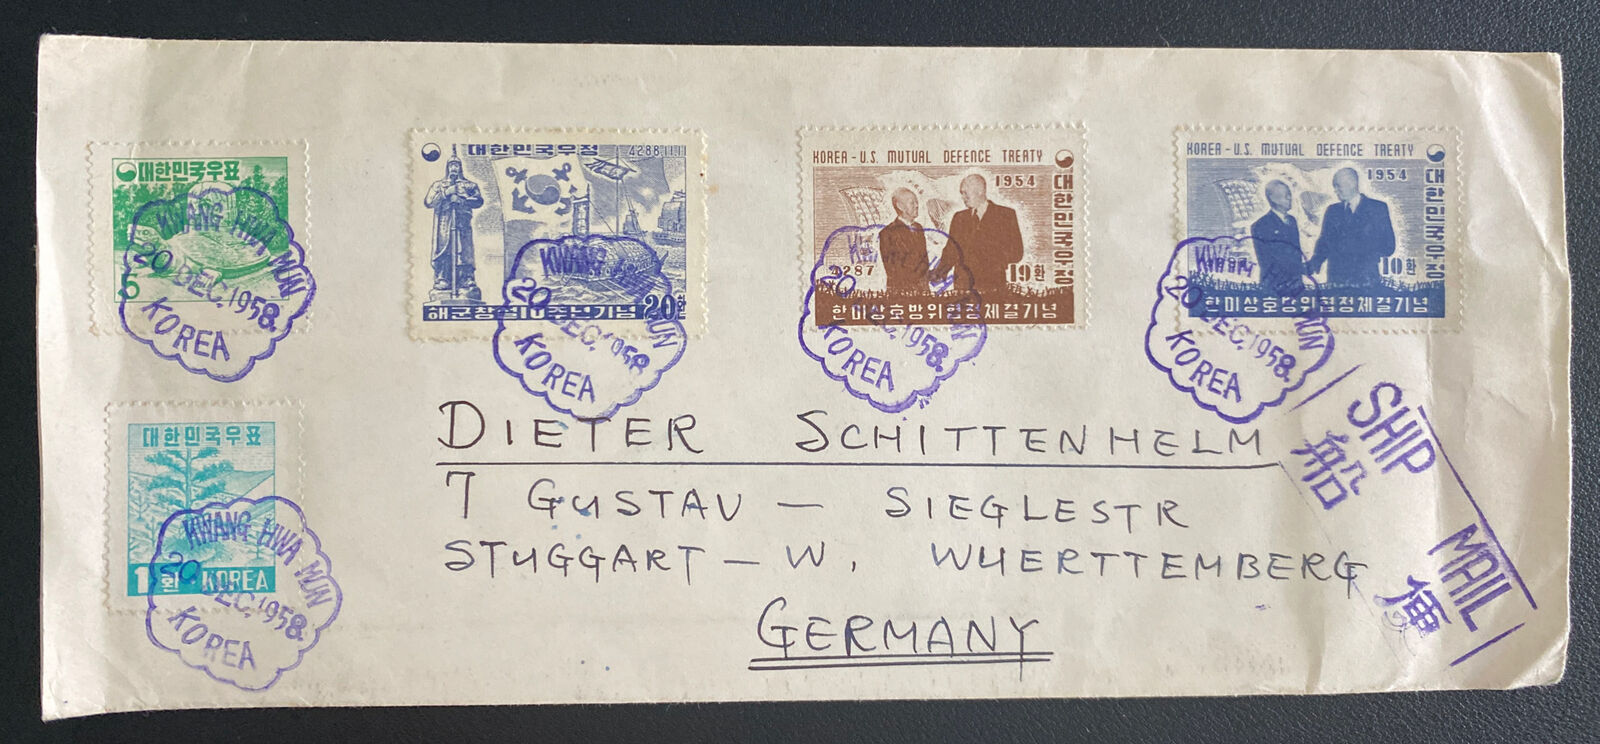 1958 Kwang Korea First day Ship Cover Max 54% OFF To Lowest price challenge Stuttgart Germany Mail